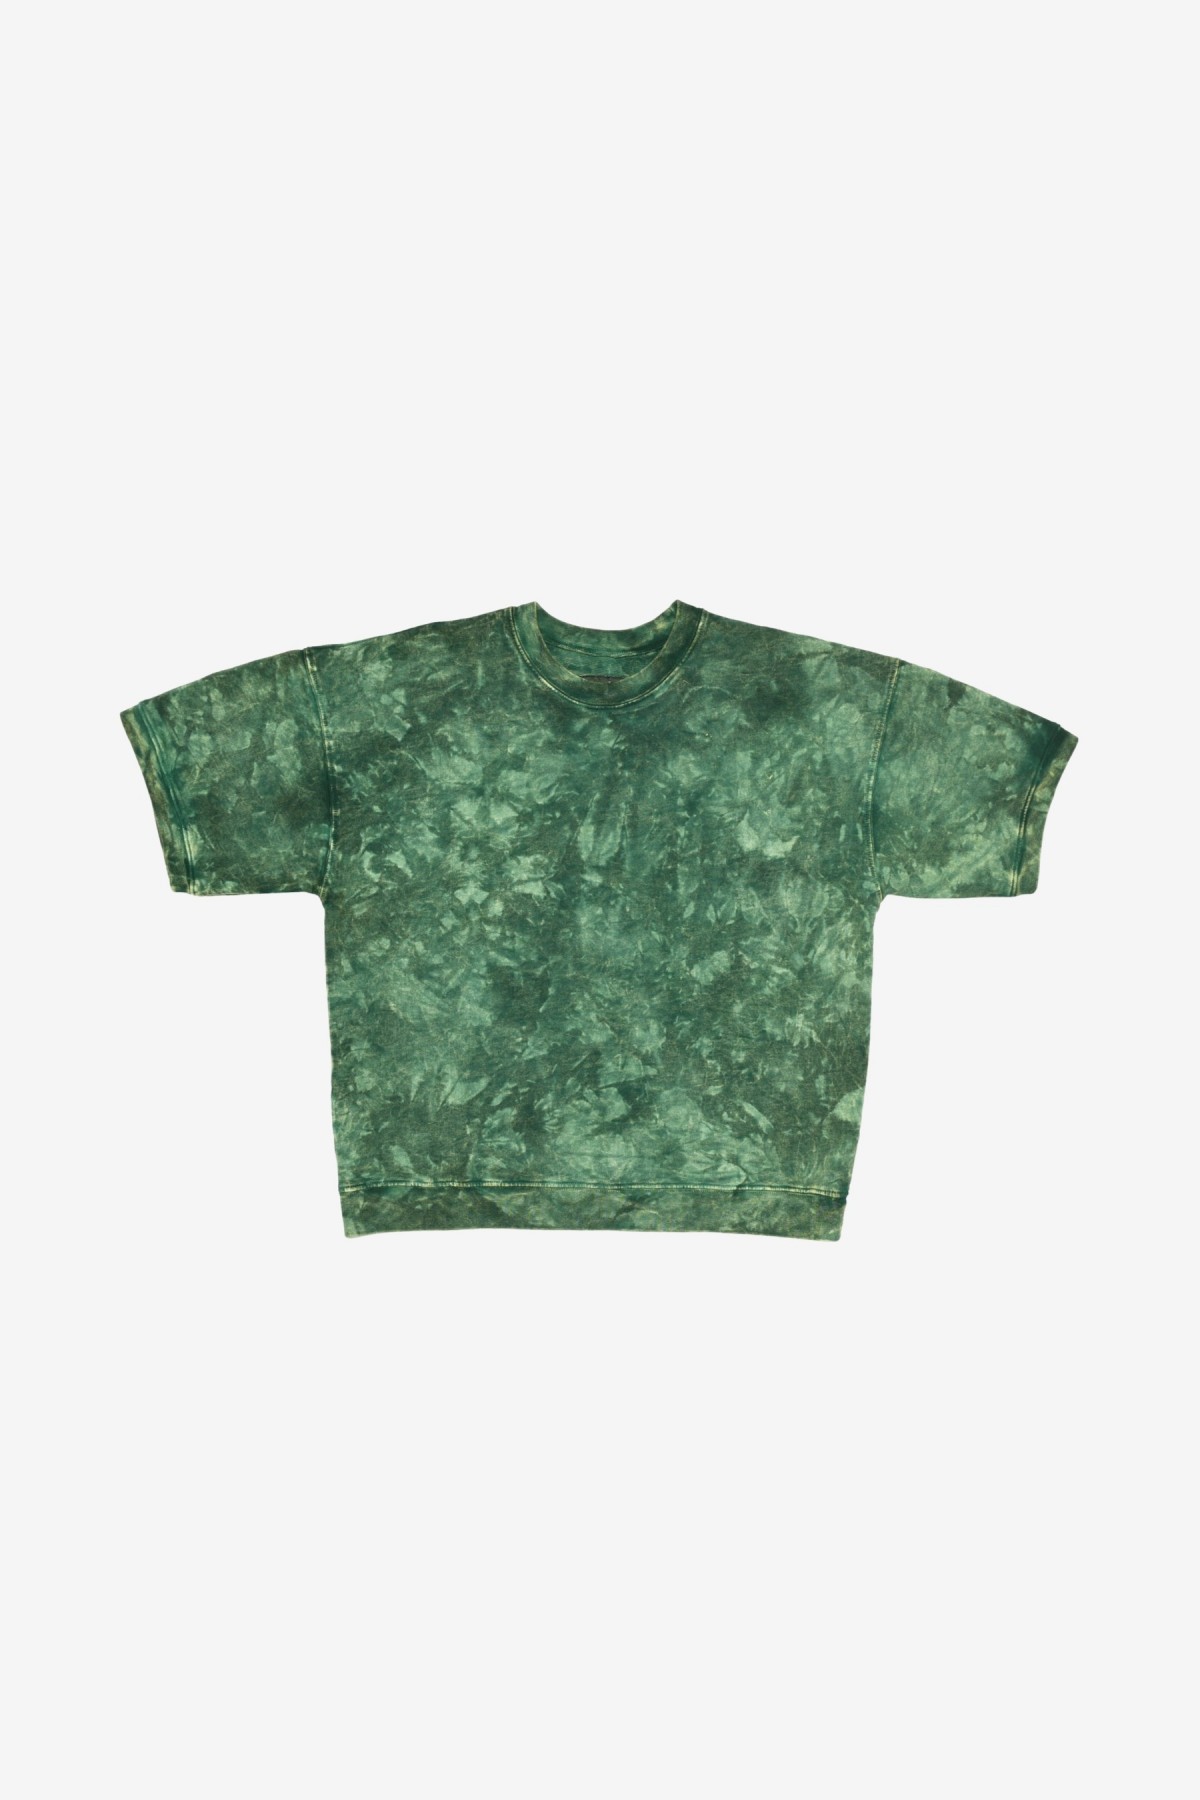 Monitaly French Terry Cropped S/S Sweat Shirt in Tie Dye Midori + Mineral